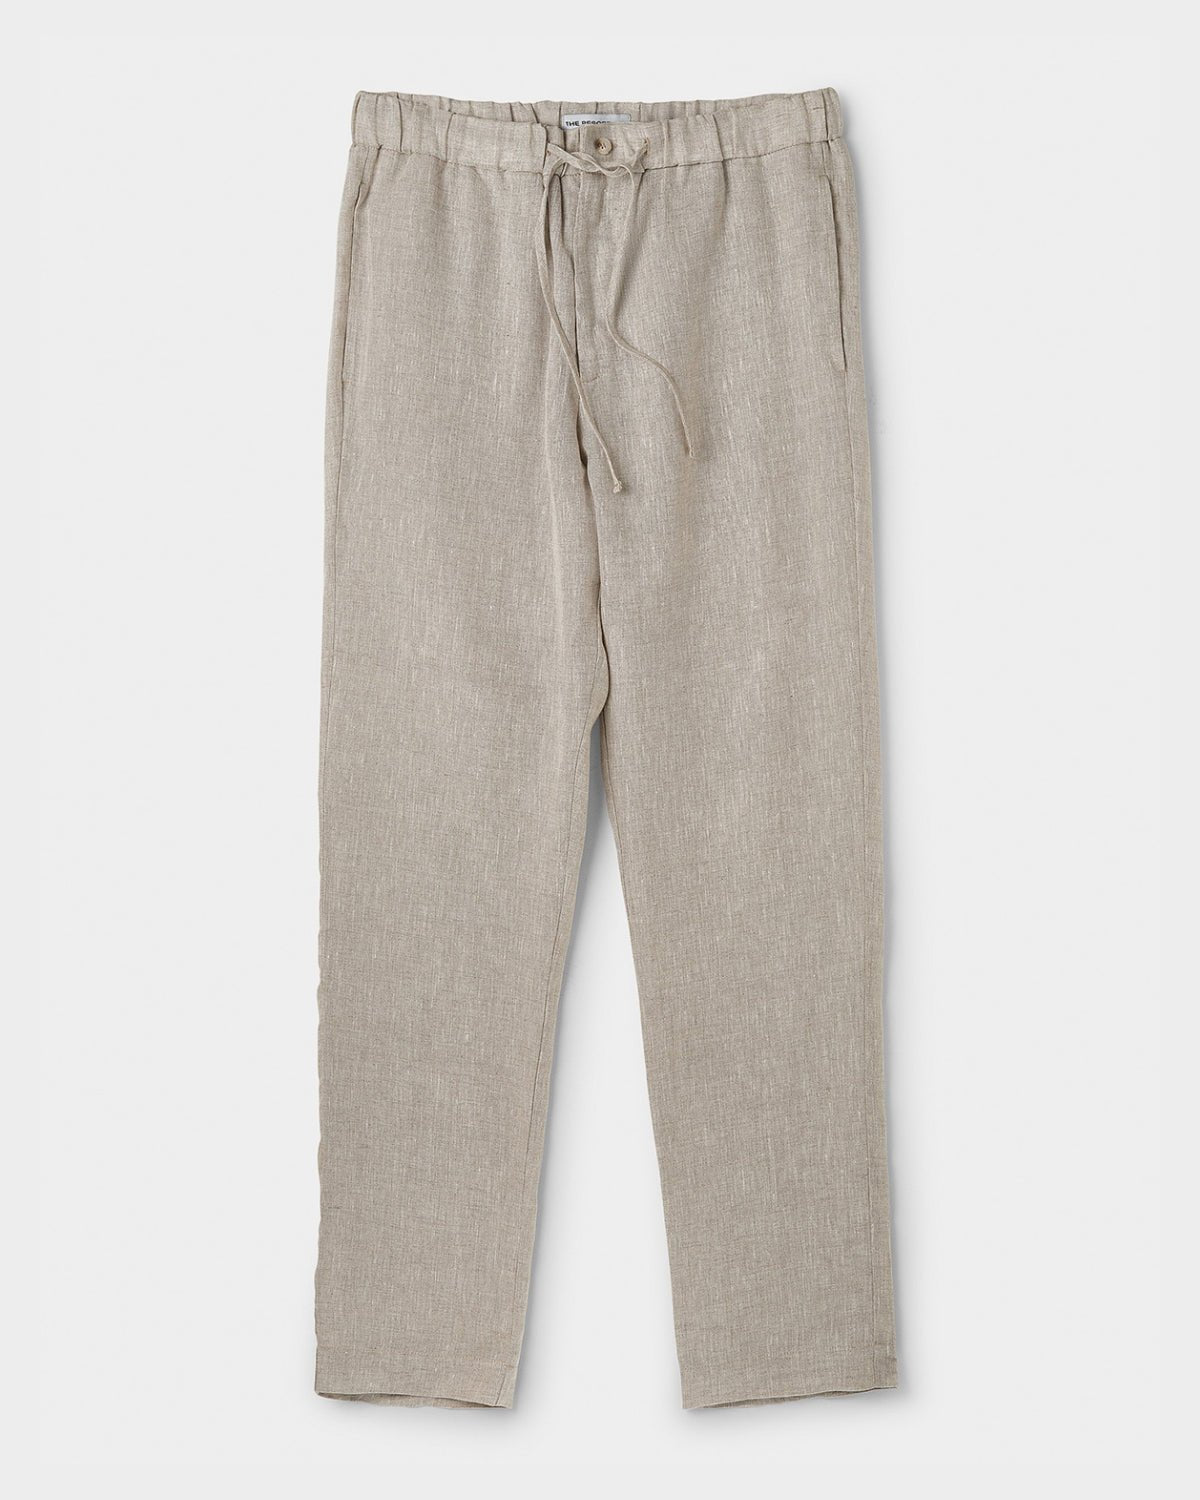 Linen Trousers Oatmeal - THE RESORT CO